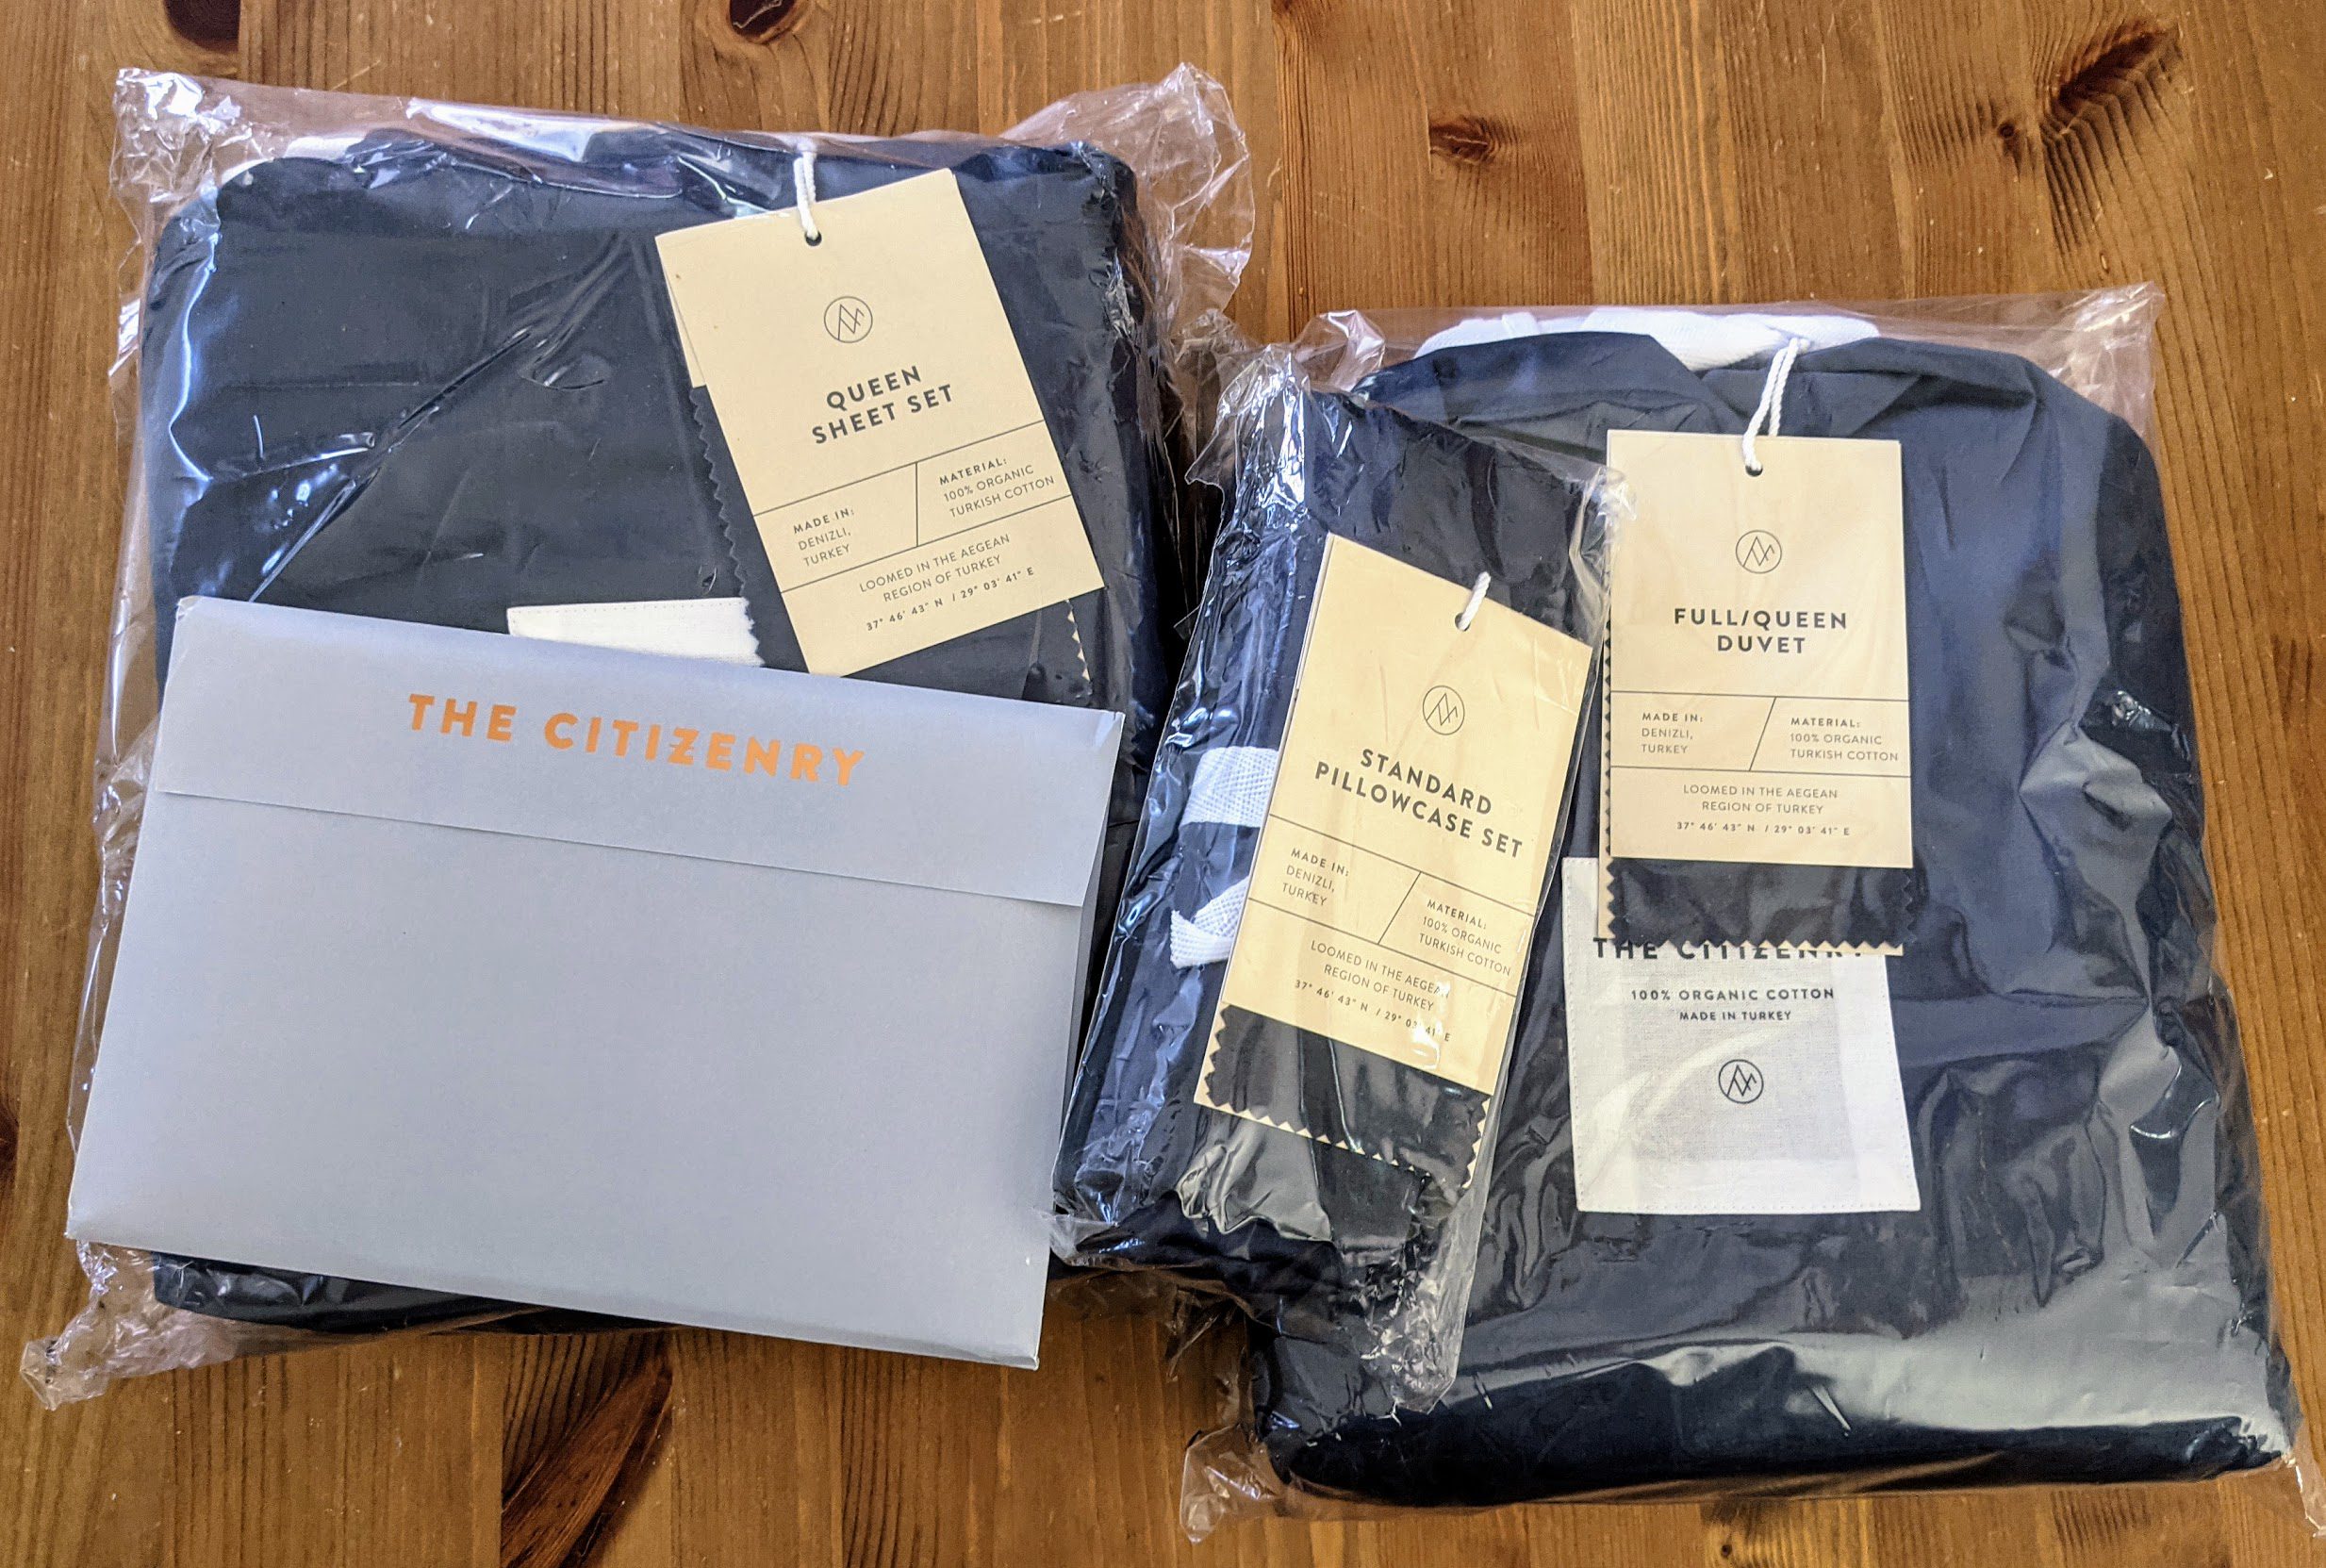 Citizenry packaging